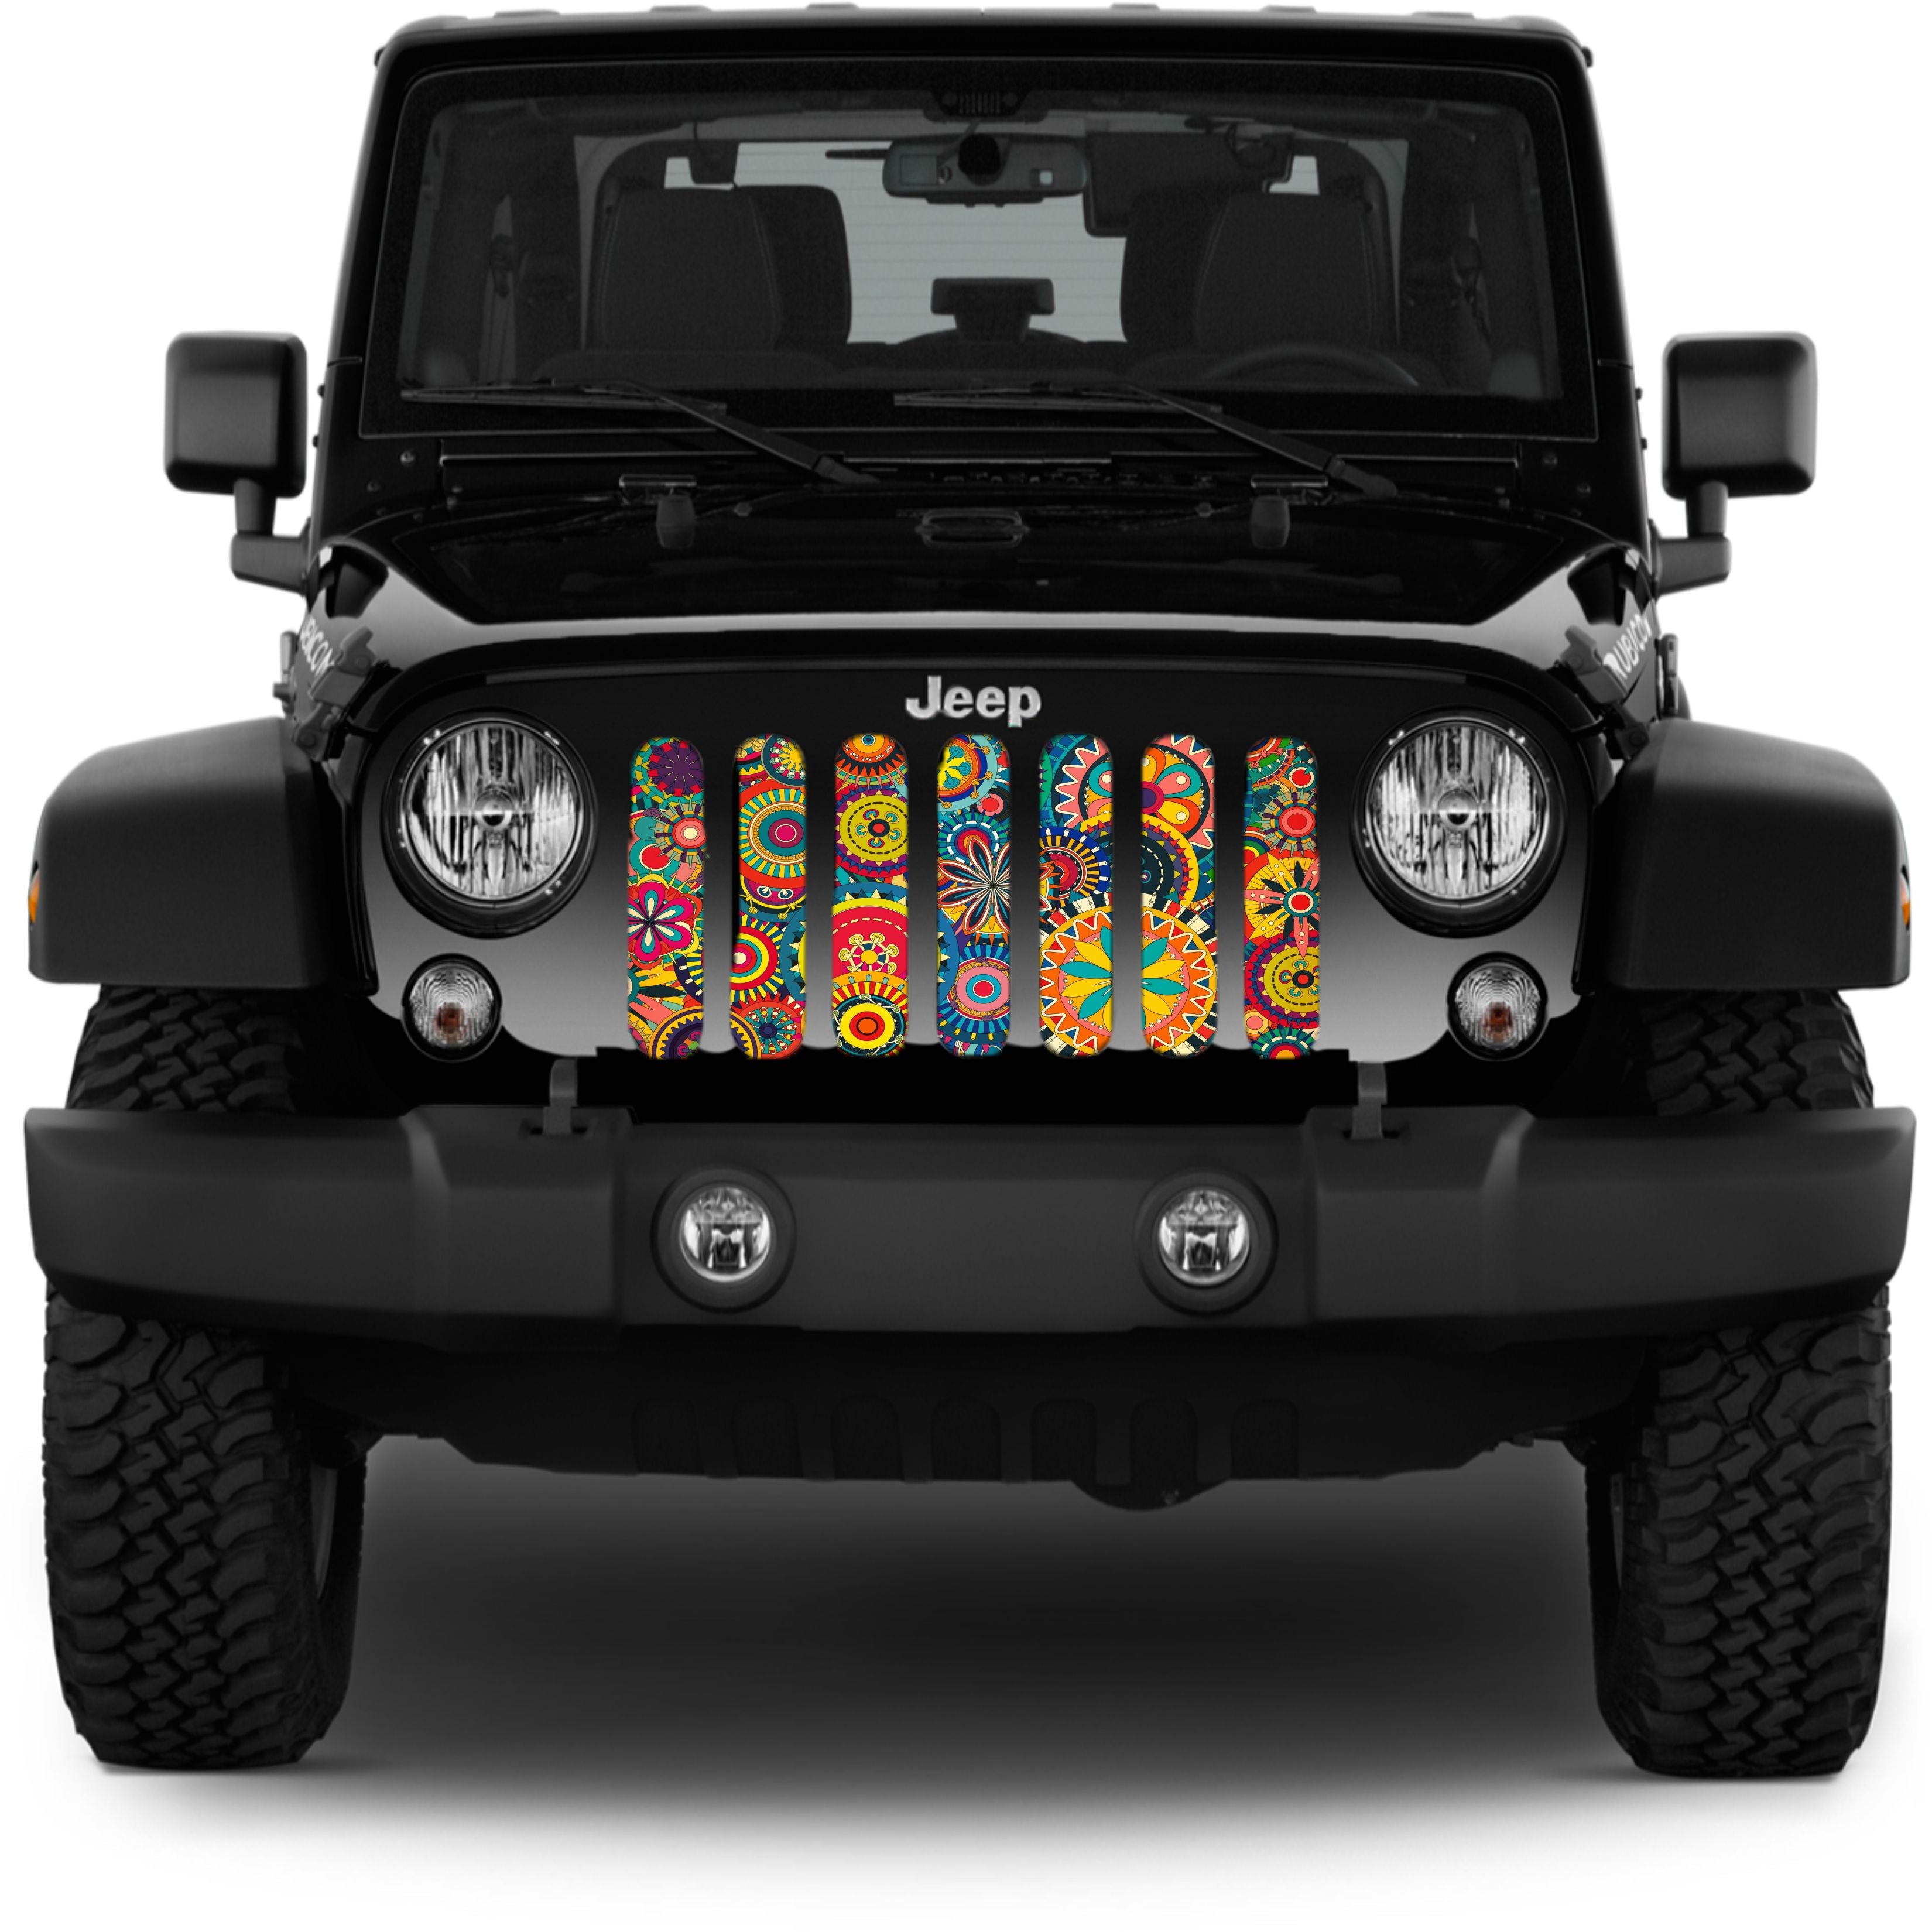 Bright & Funky Colorful Mandala Jeep Grille Insert